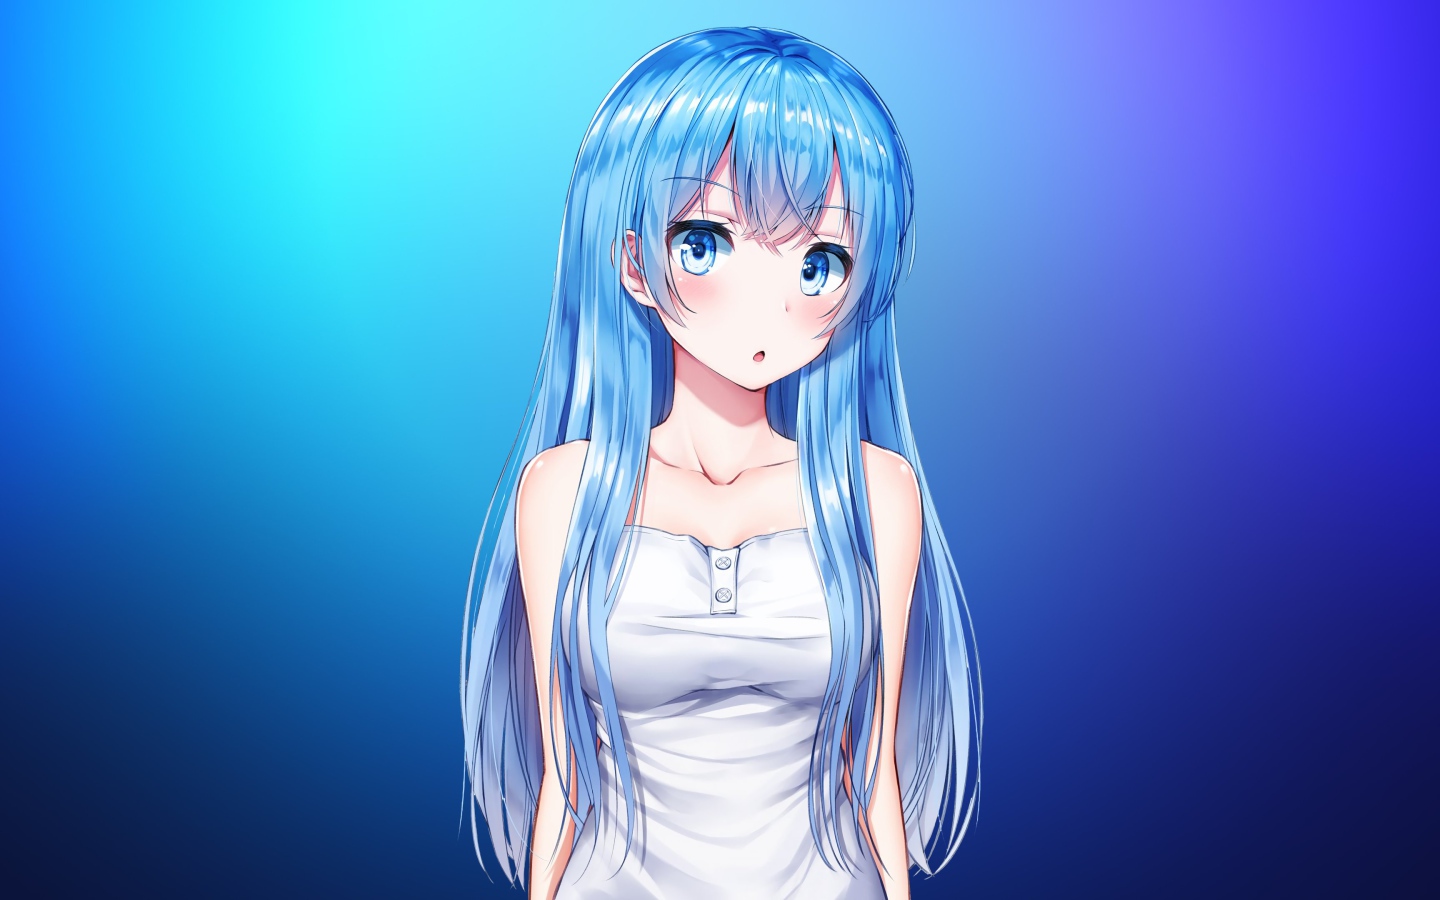 Anime girl with blue hair Desktop wallpapers 1440x900